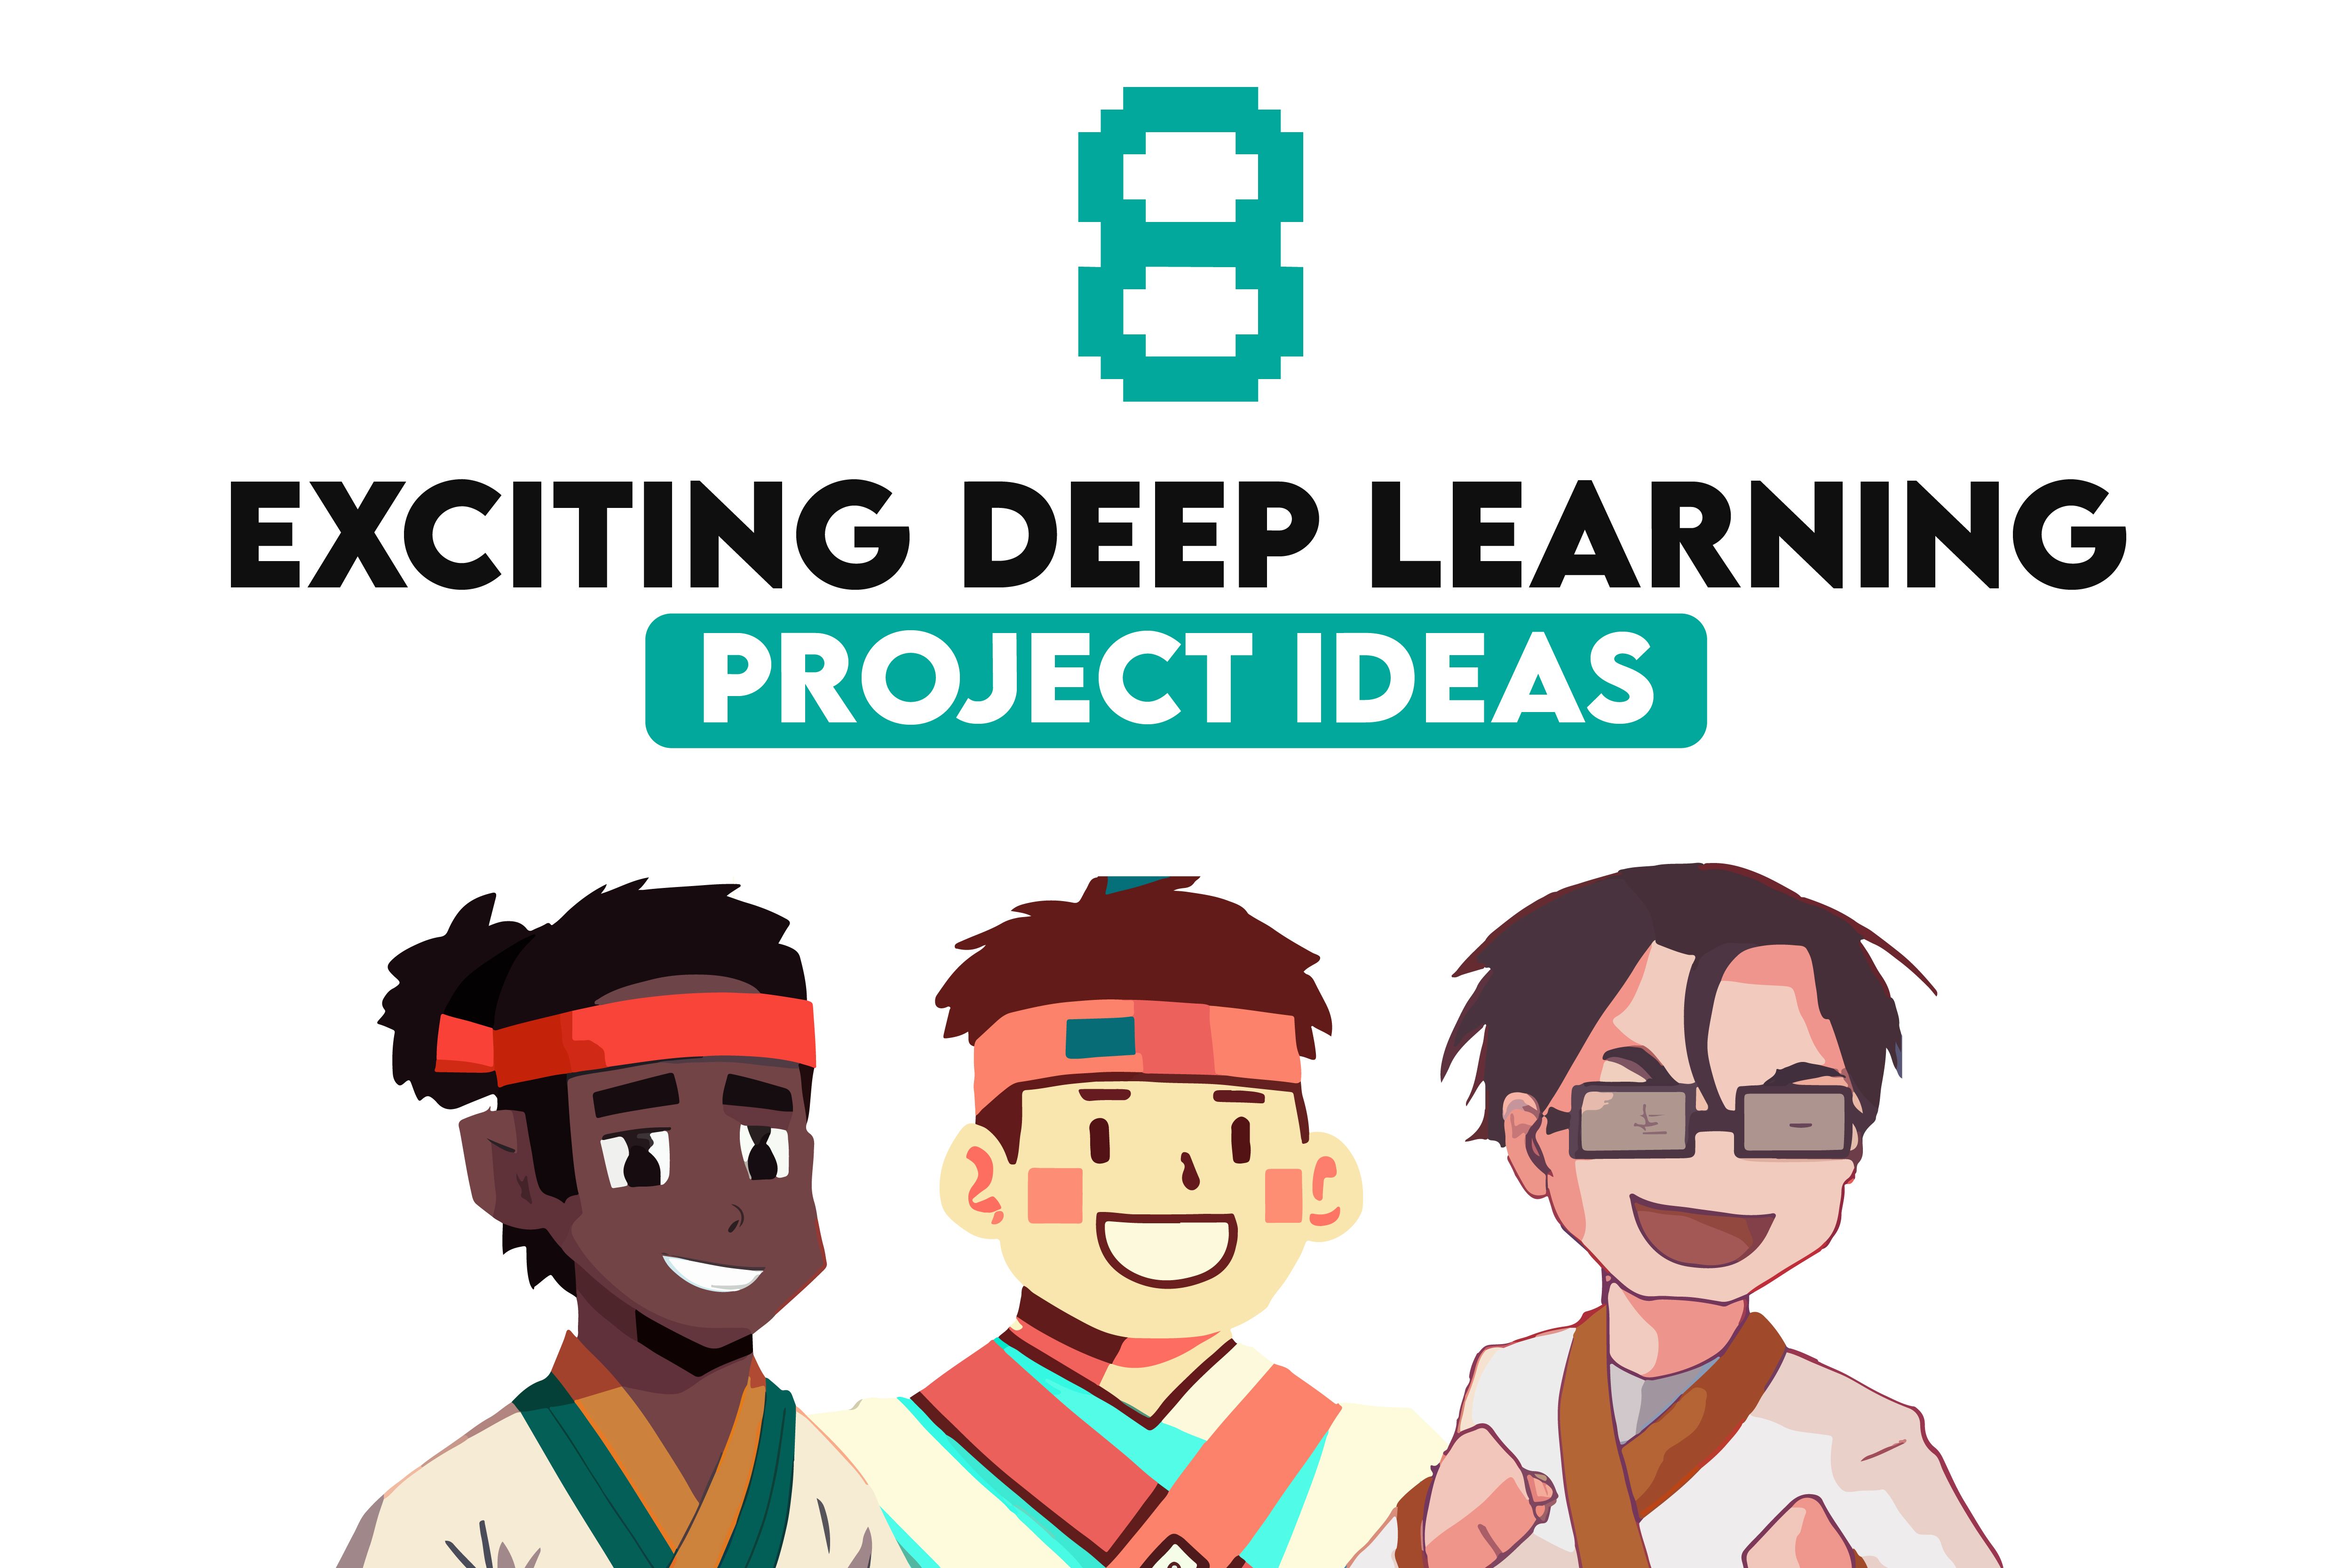 8 Exciting Deep Learning Project Ideas